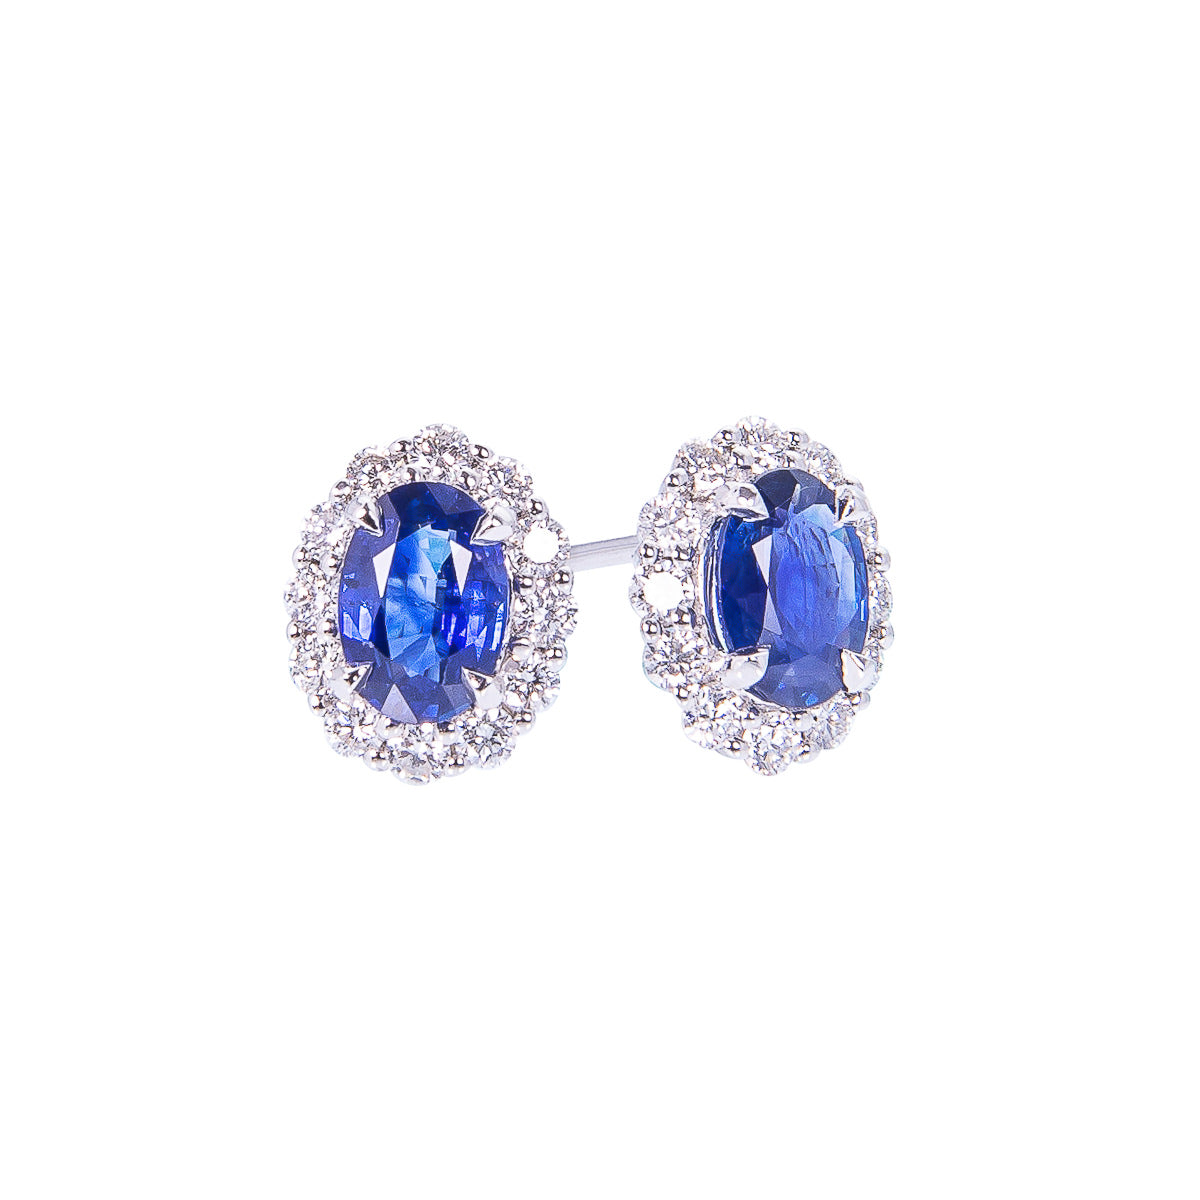 Sabel Collection 14K White Gold Oval Sapphire and Diamond Halo Stud Earrings